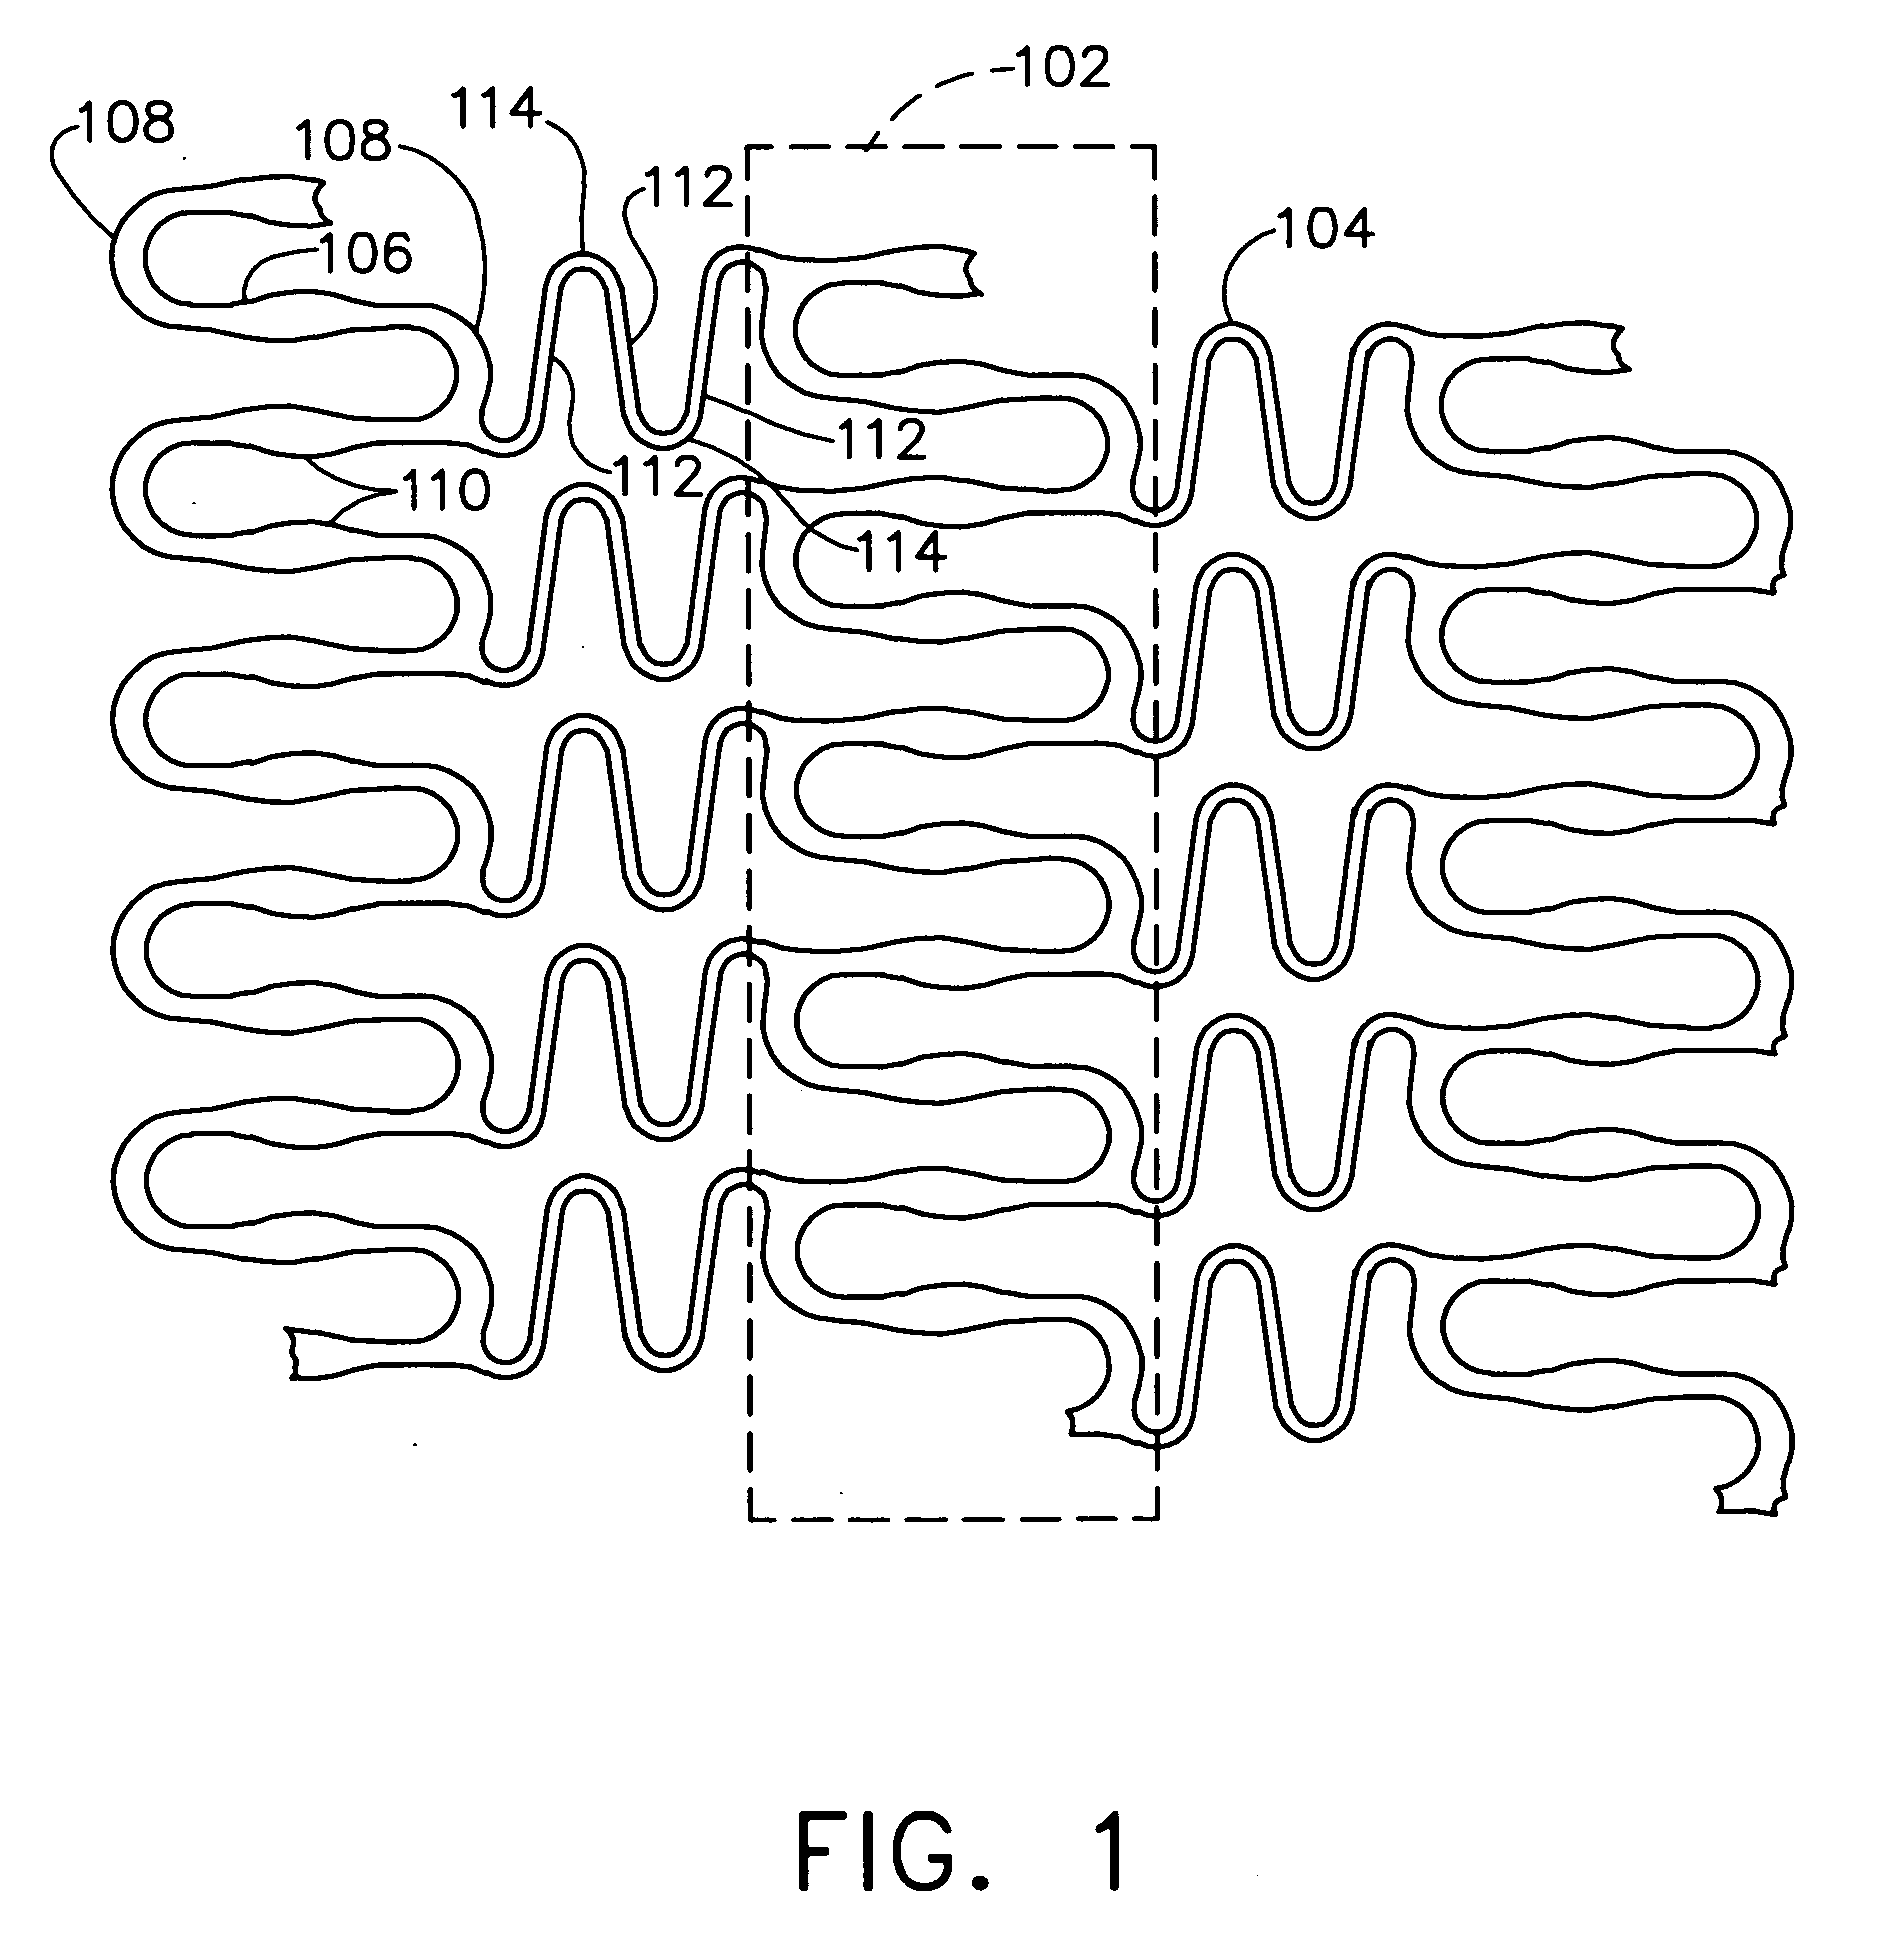 Drug delivery devices and methods